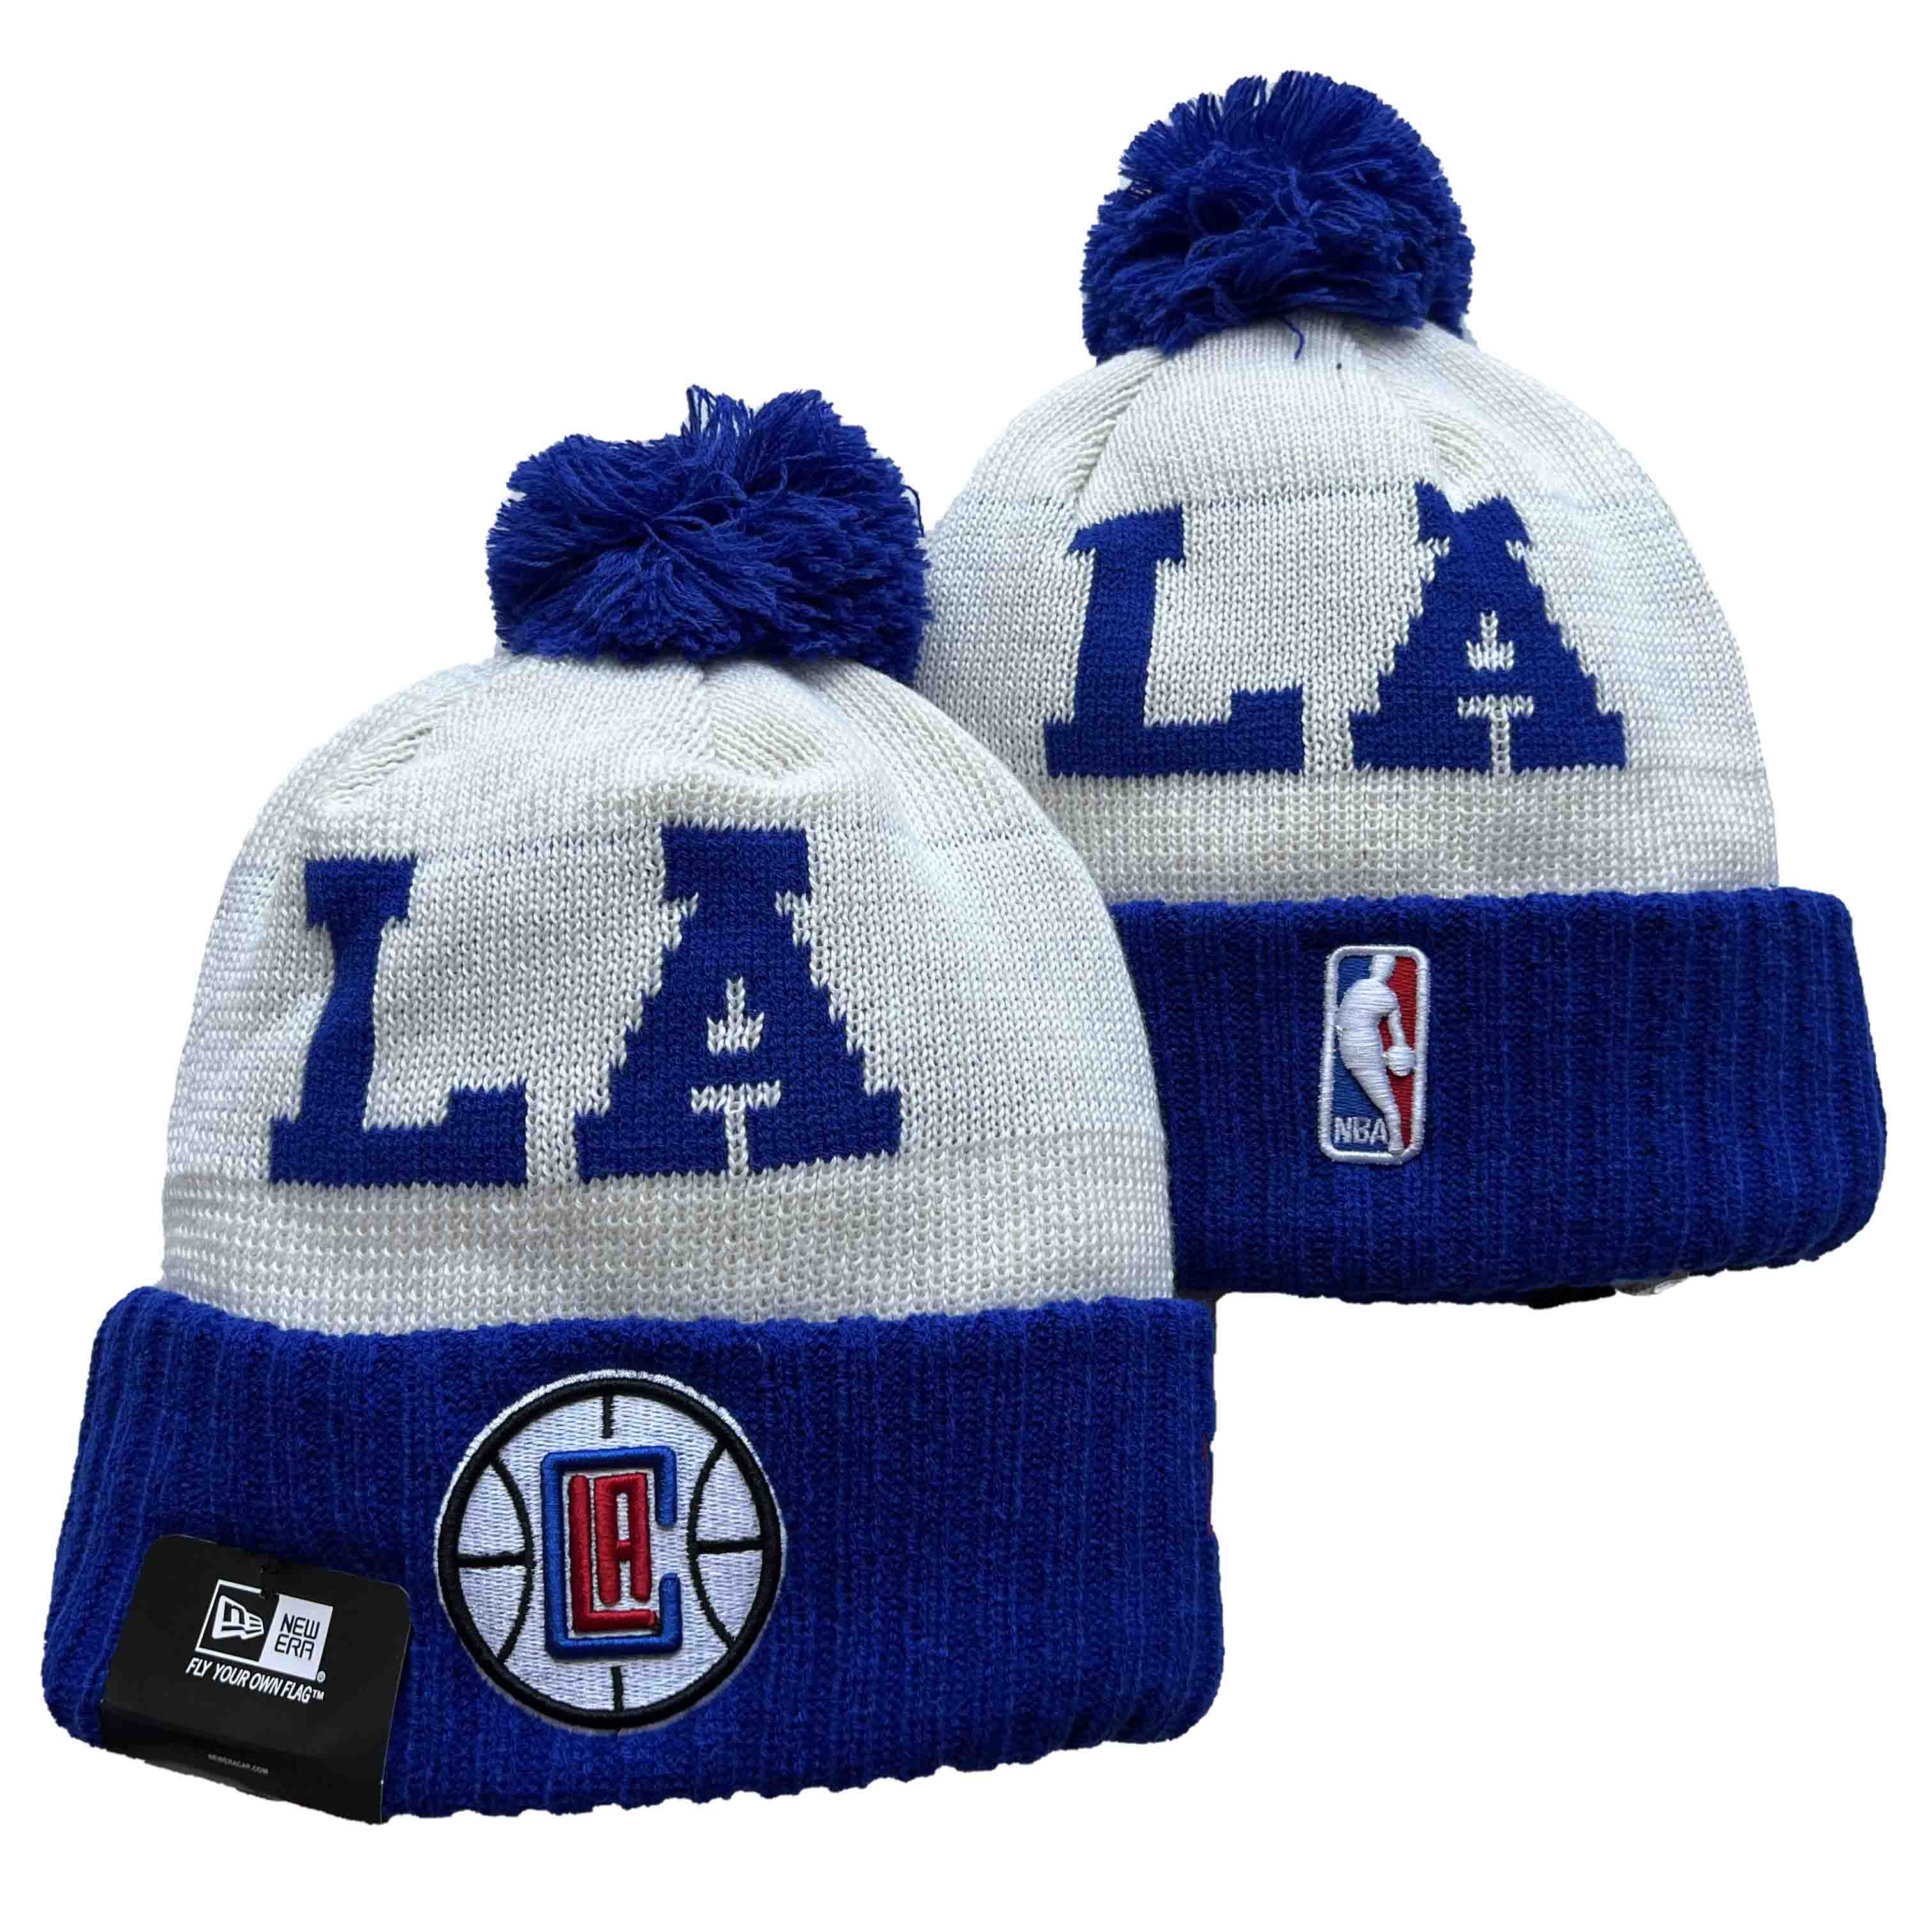 NBA Los Angeles Clippers Beanies Knit Hats-YD507